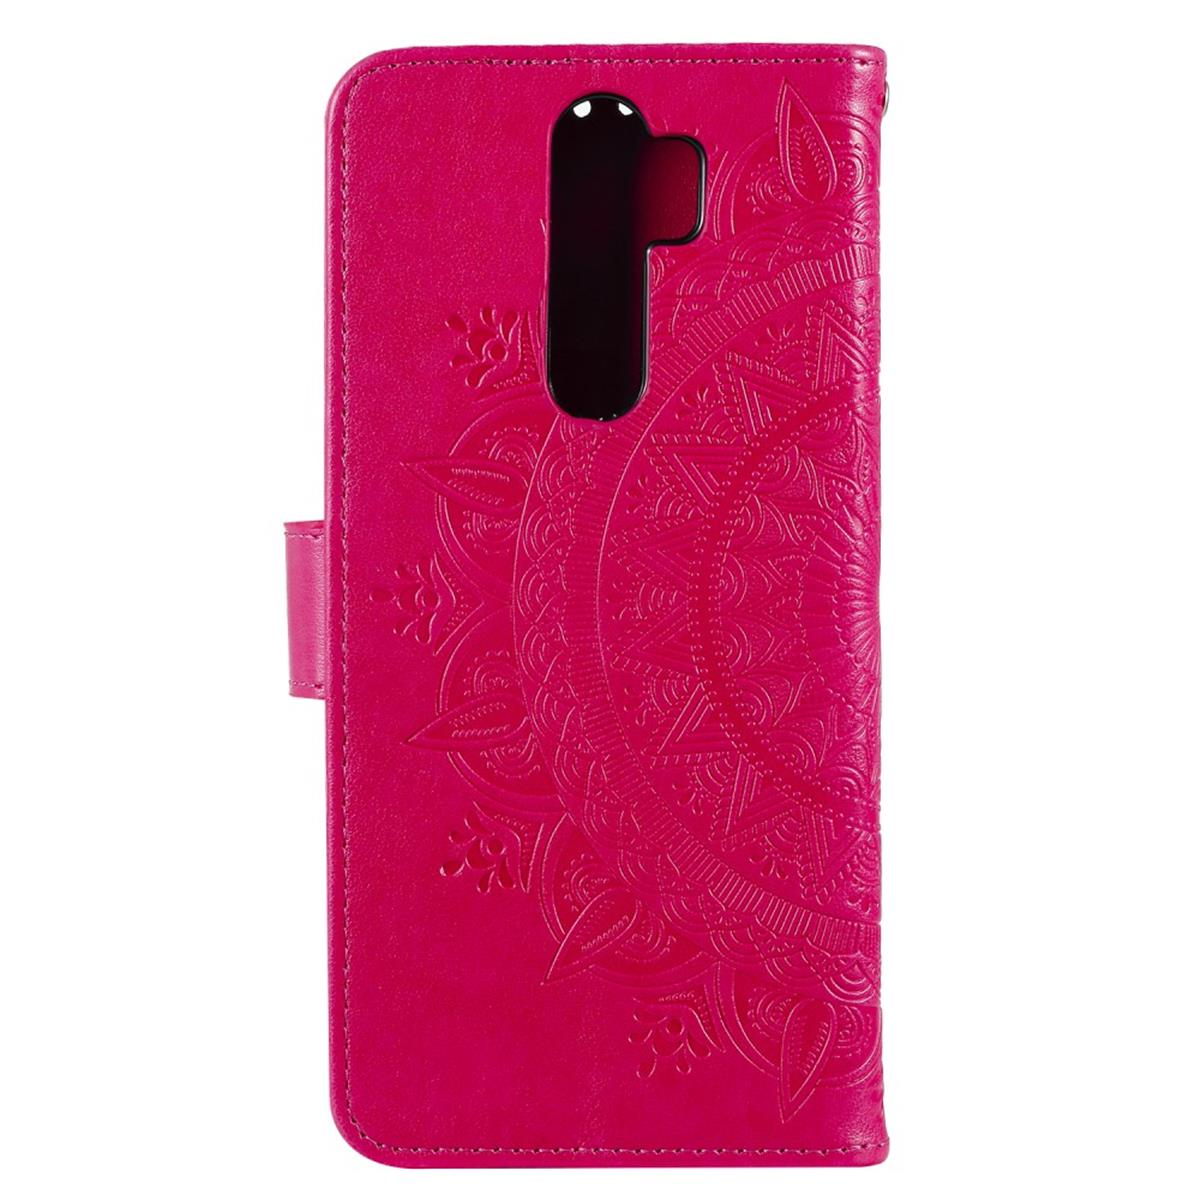 COVERKINGZ Klapphülle mit Mandala Pro, Pink Muster, Bookcover, 8 OnePlus